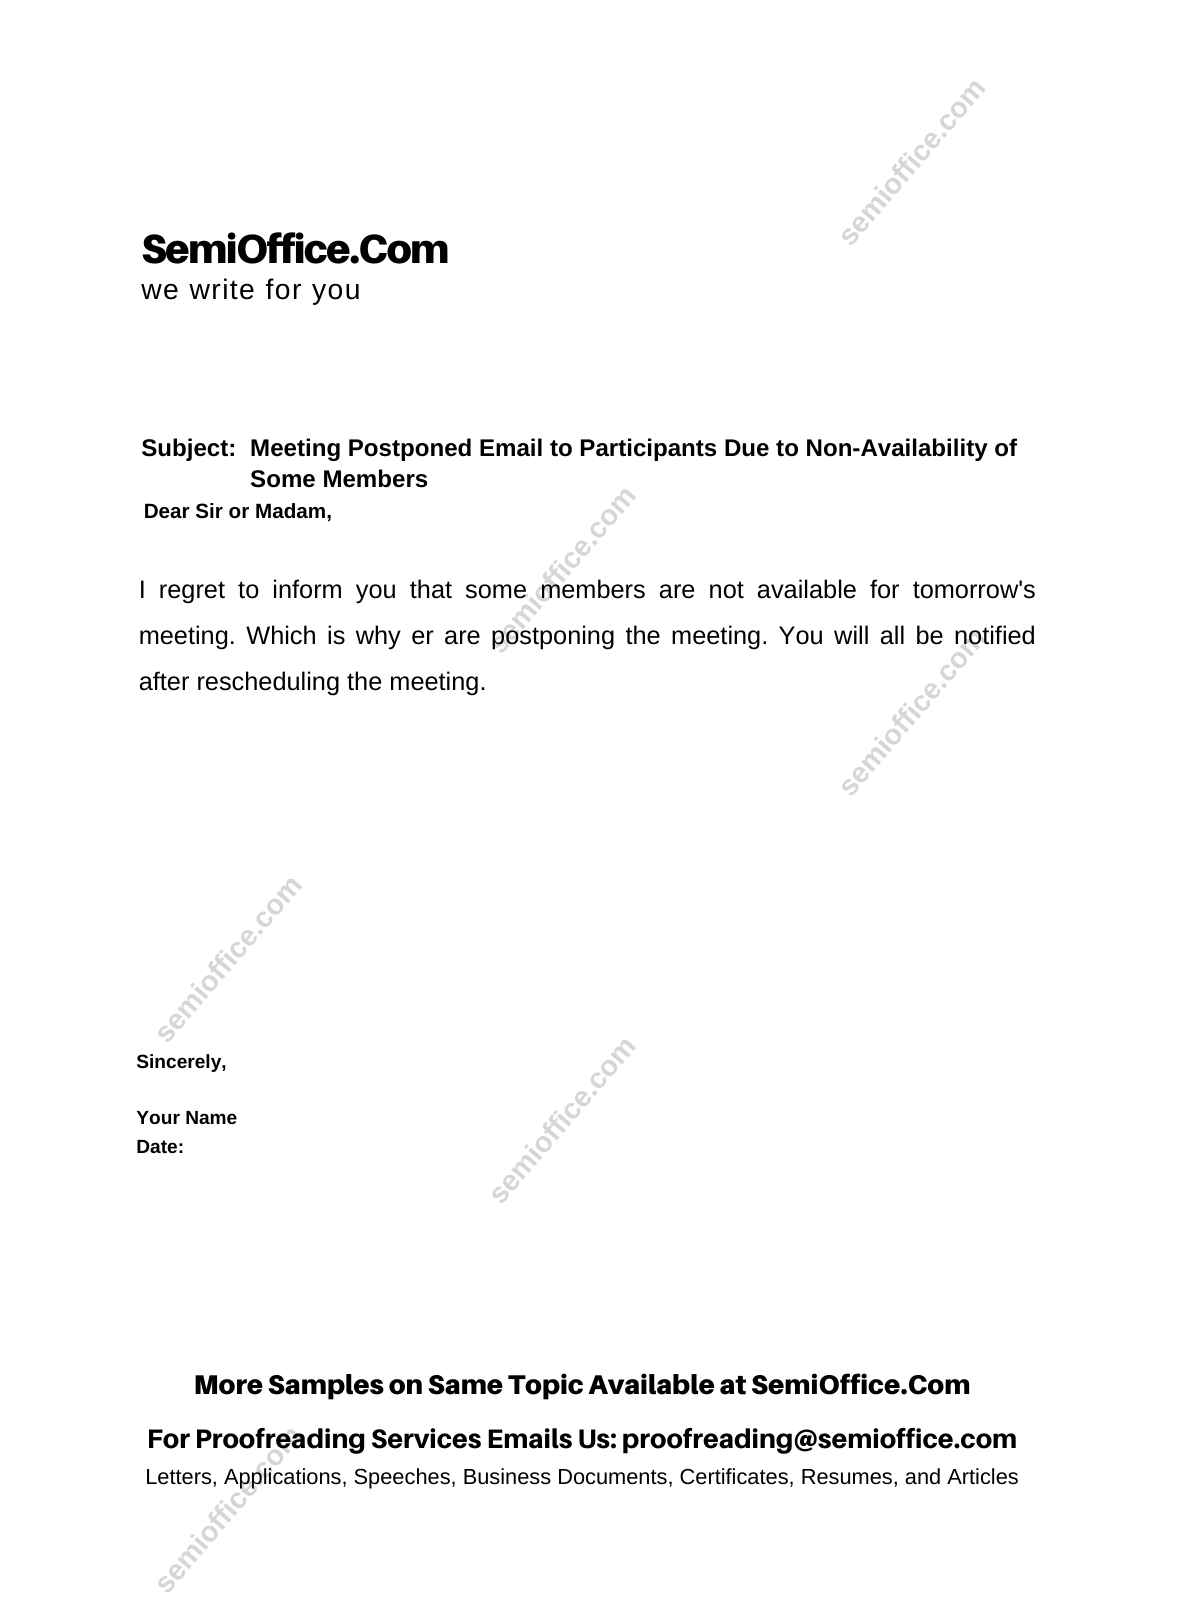 Postponed Meeting Letter Sample For Participants Semioffice